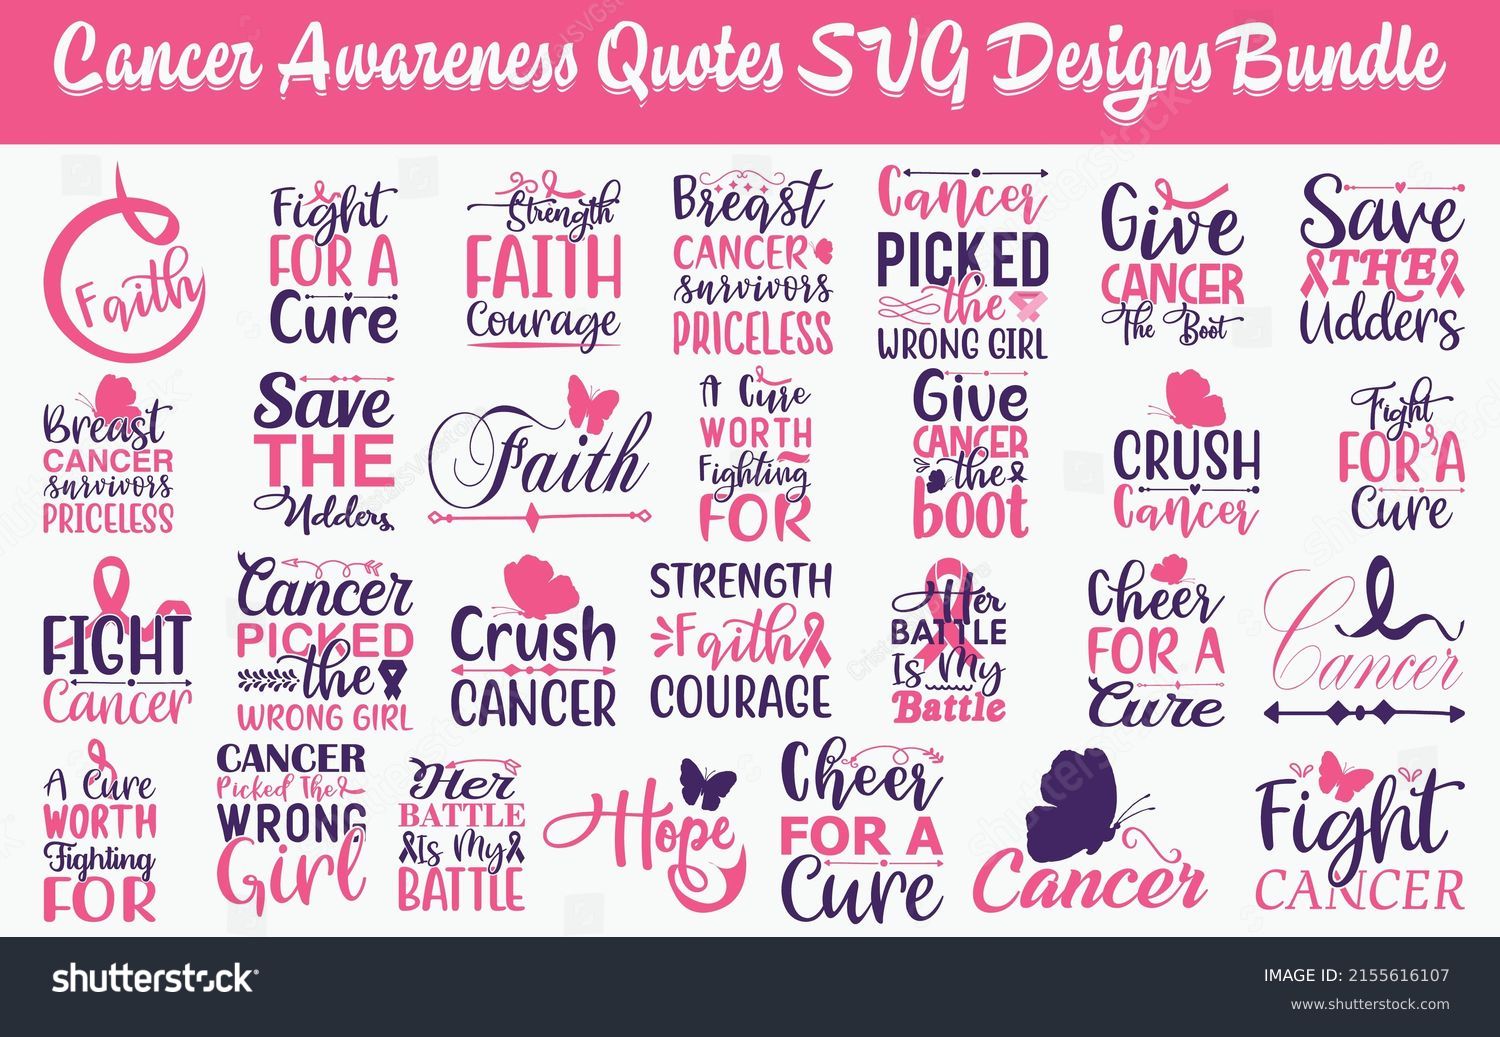 SVG of Cancer awareness Quotes SVG Cut Files Designs Bundle, Cancer awareness quotes SVG cut files, Cancer awareness quotes t shirt designs svg